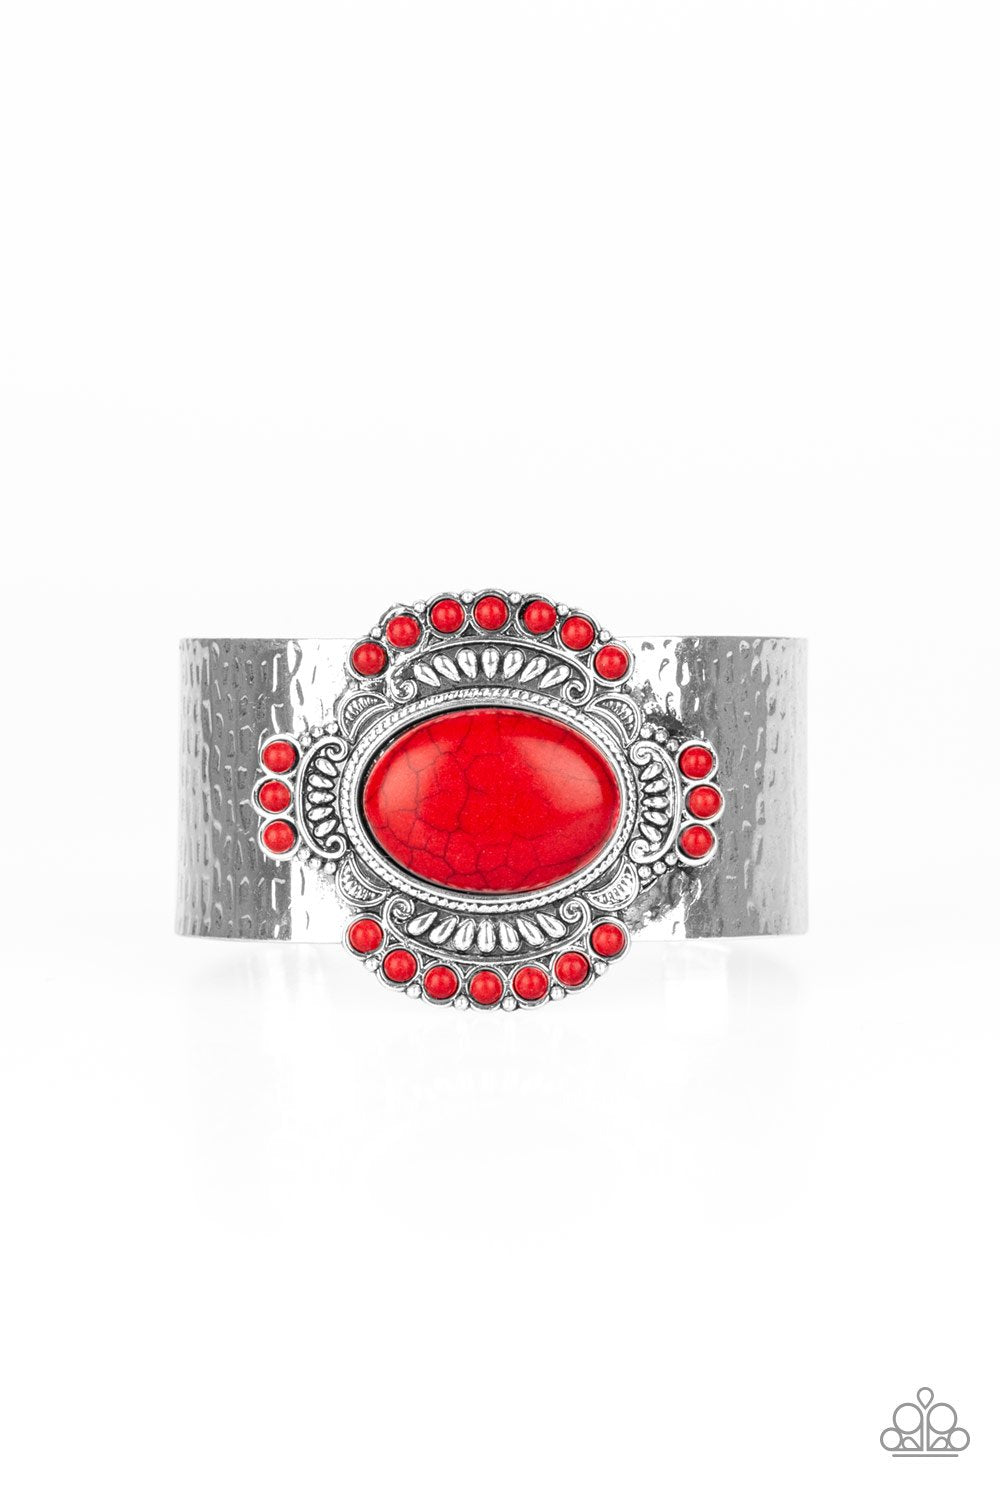 CANYON CRAFTED - RED TURQUOISE SILVER CUFF BRACELET